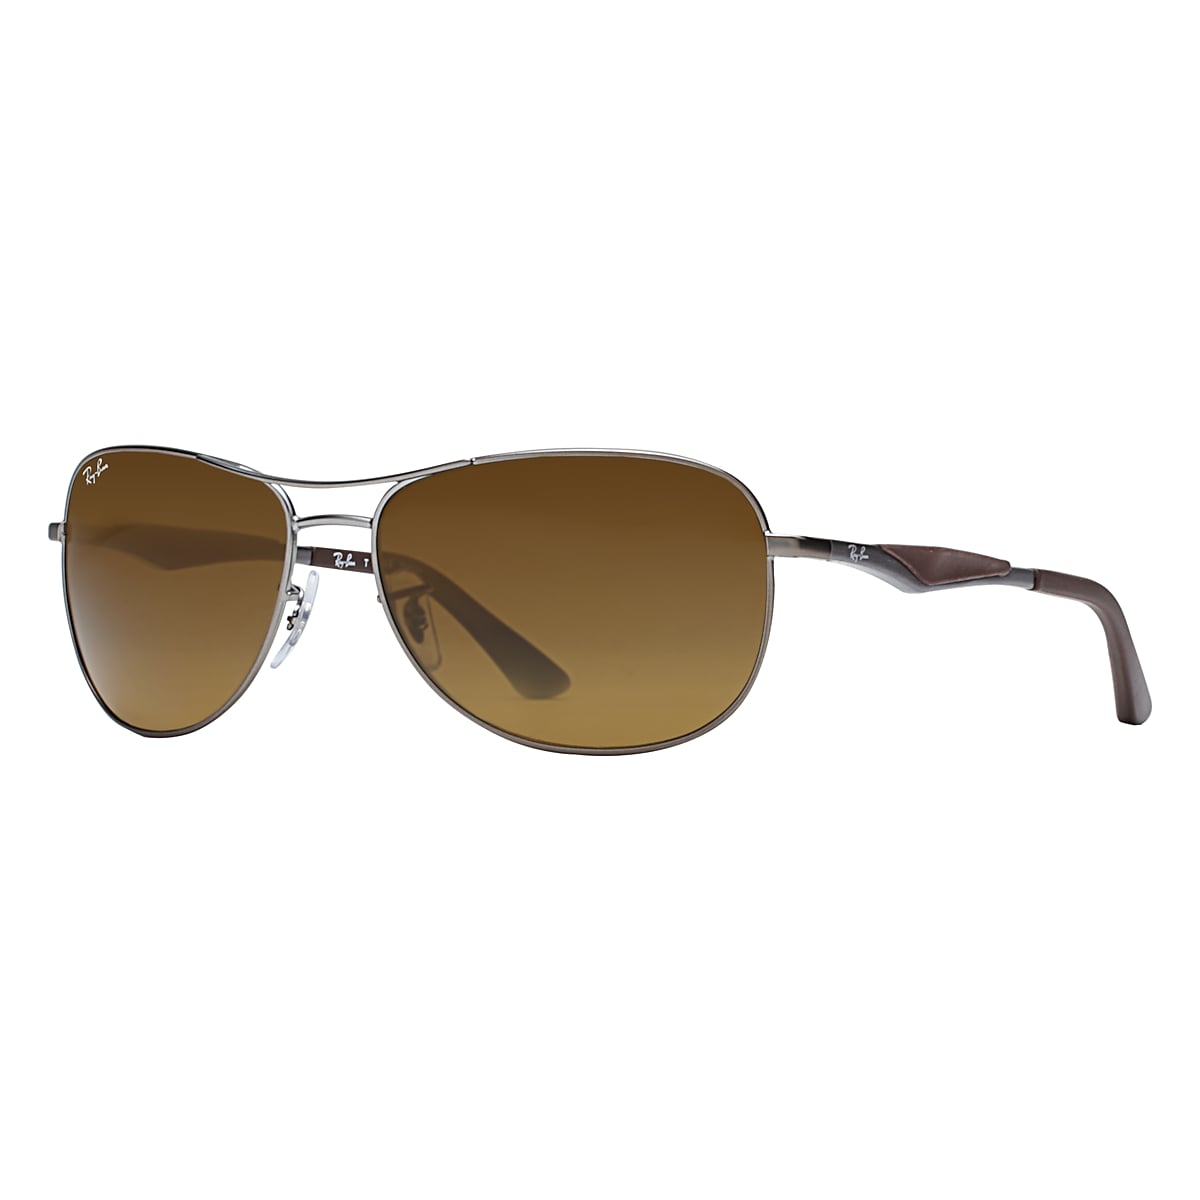 RB3519 Sunglasses in Gunmetal and Brown - RB3519 | Ray-Ban® US